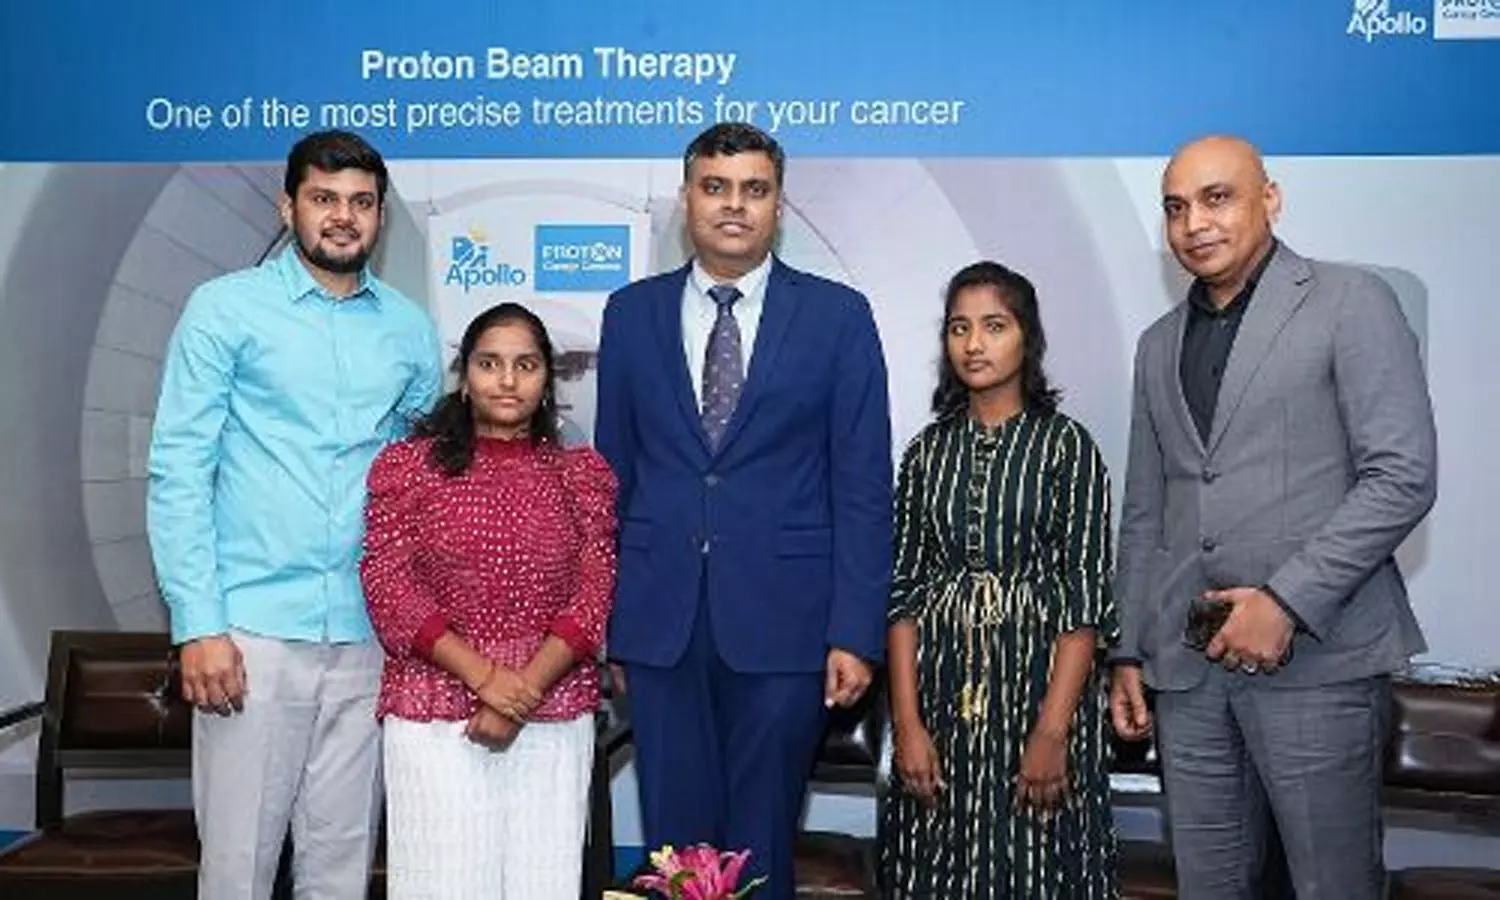 Proton Beam Therapy, a revolution in radiation oncology, brings a new ray of hope to cancer patients